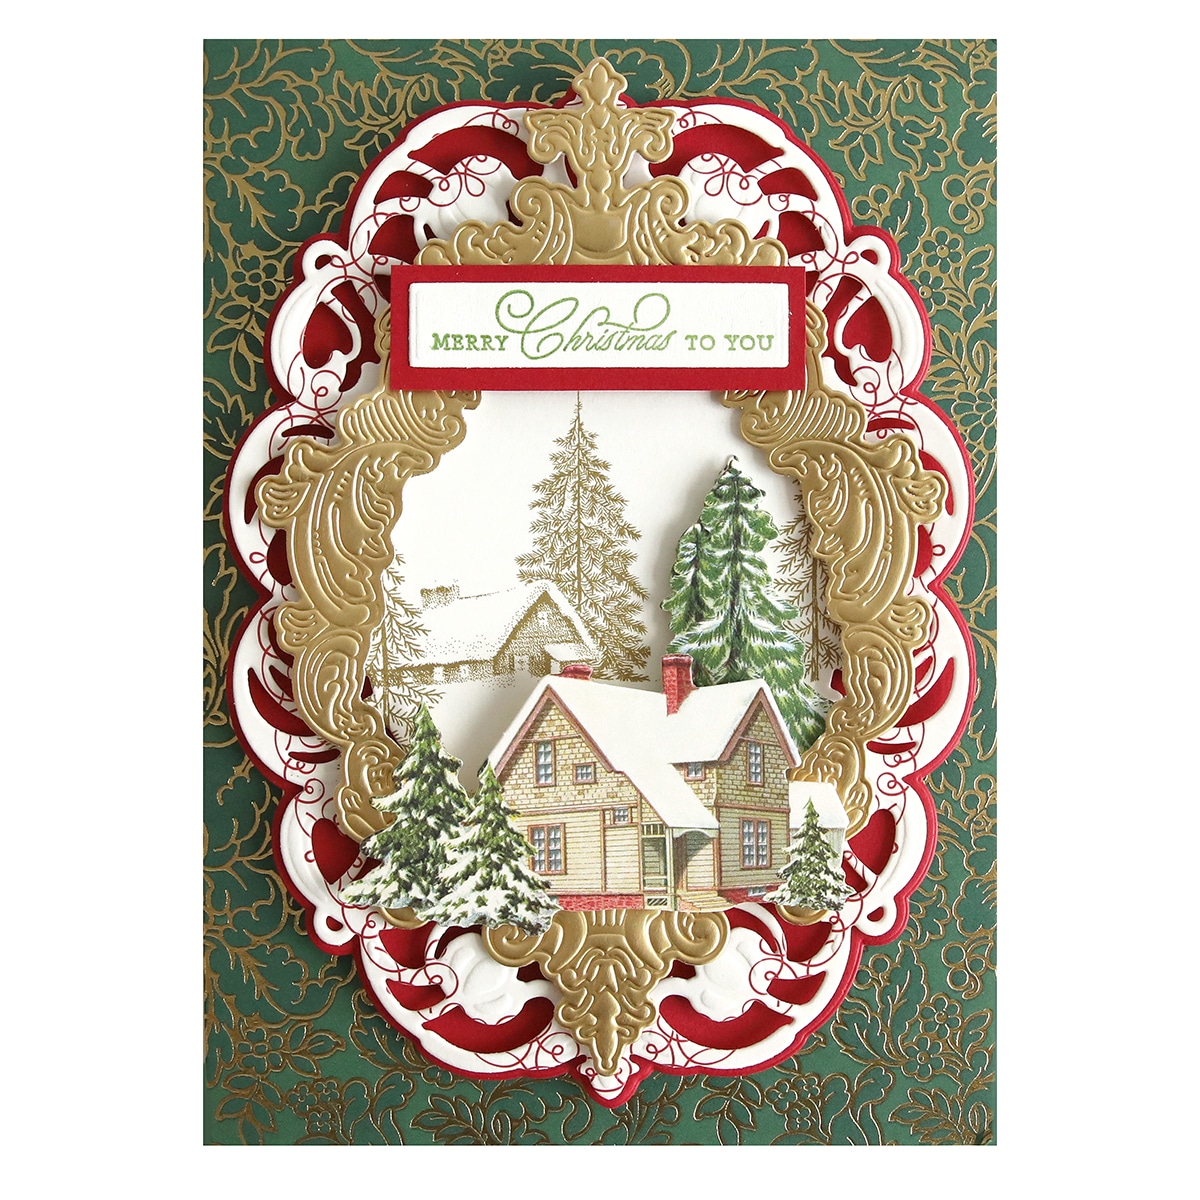 A christmas card with a house and trees.